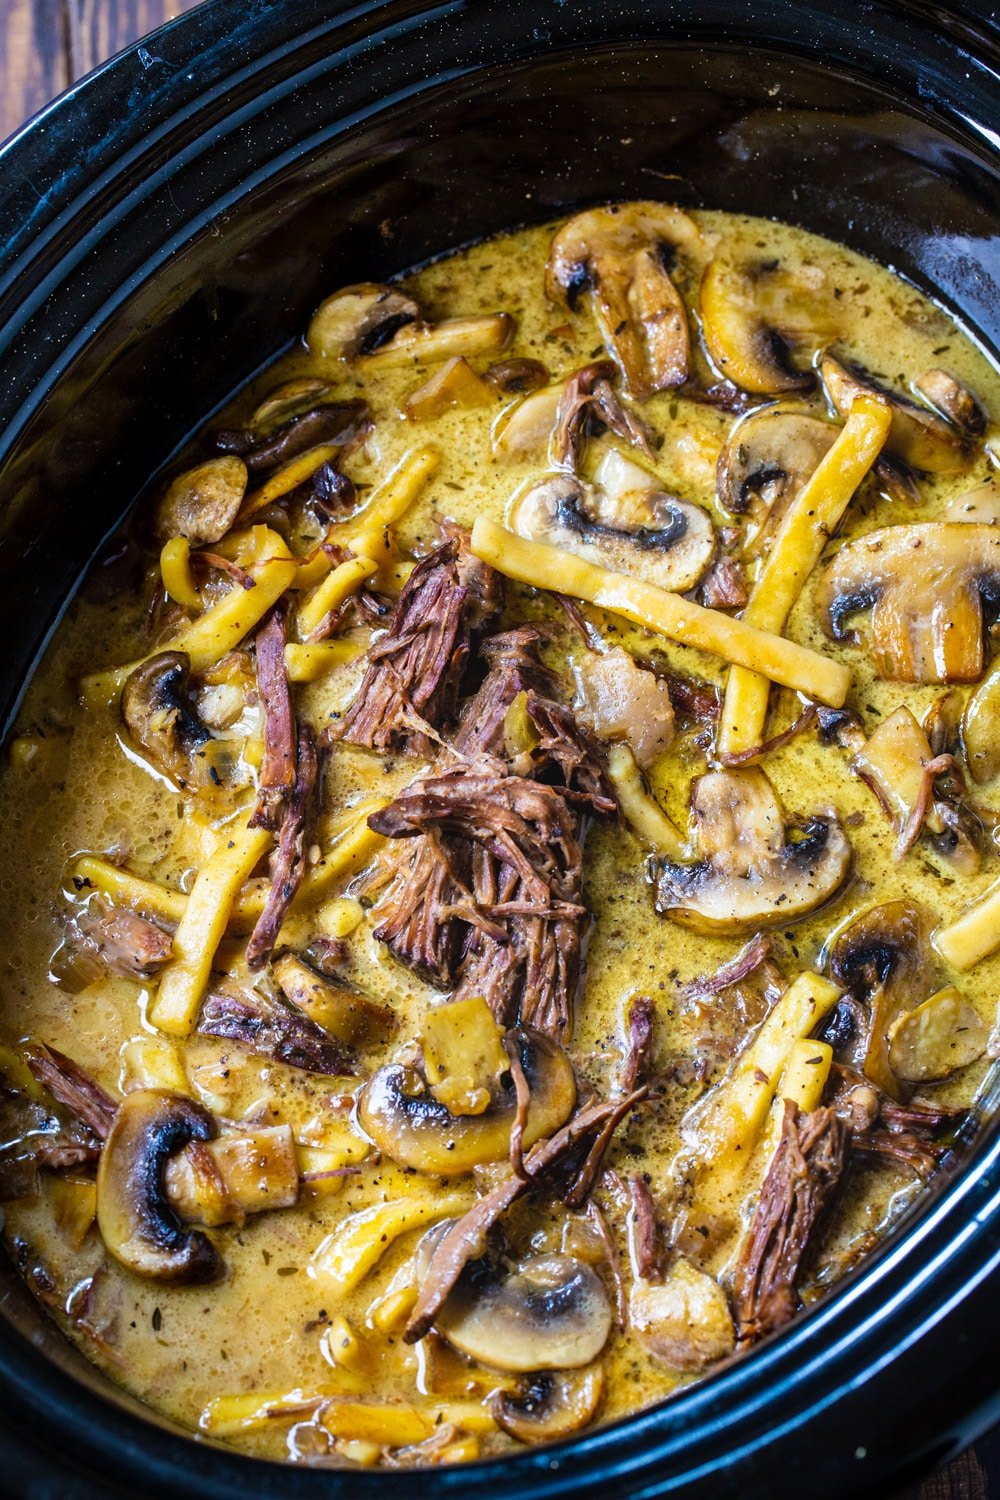 Beef and Noodles with Mushrooms in a crock pot.